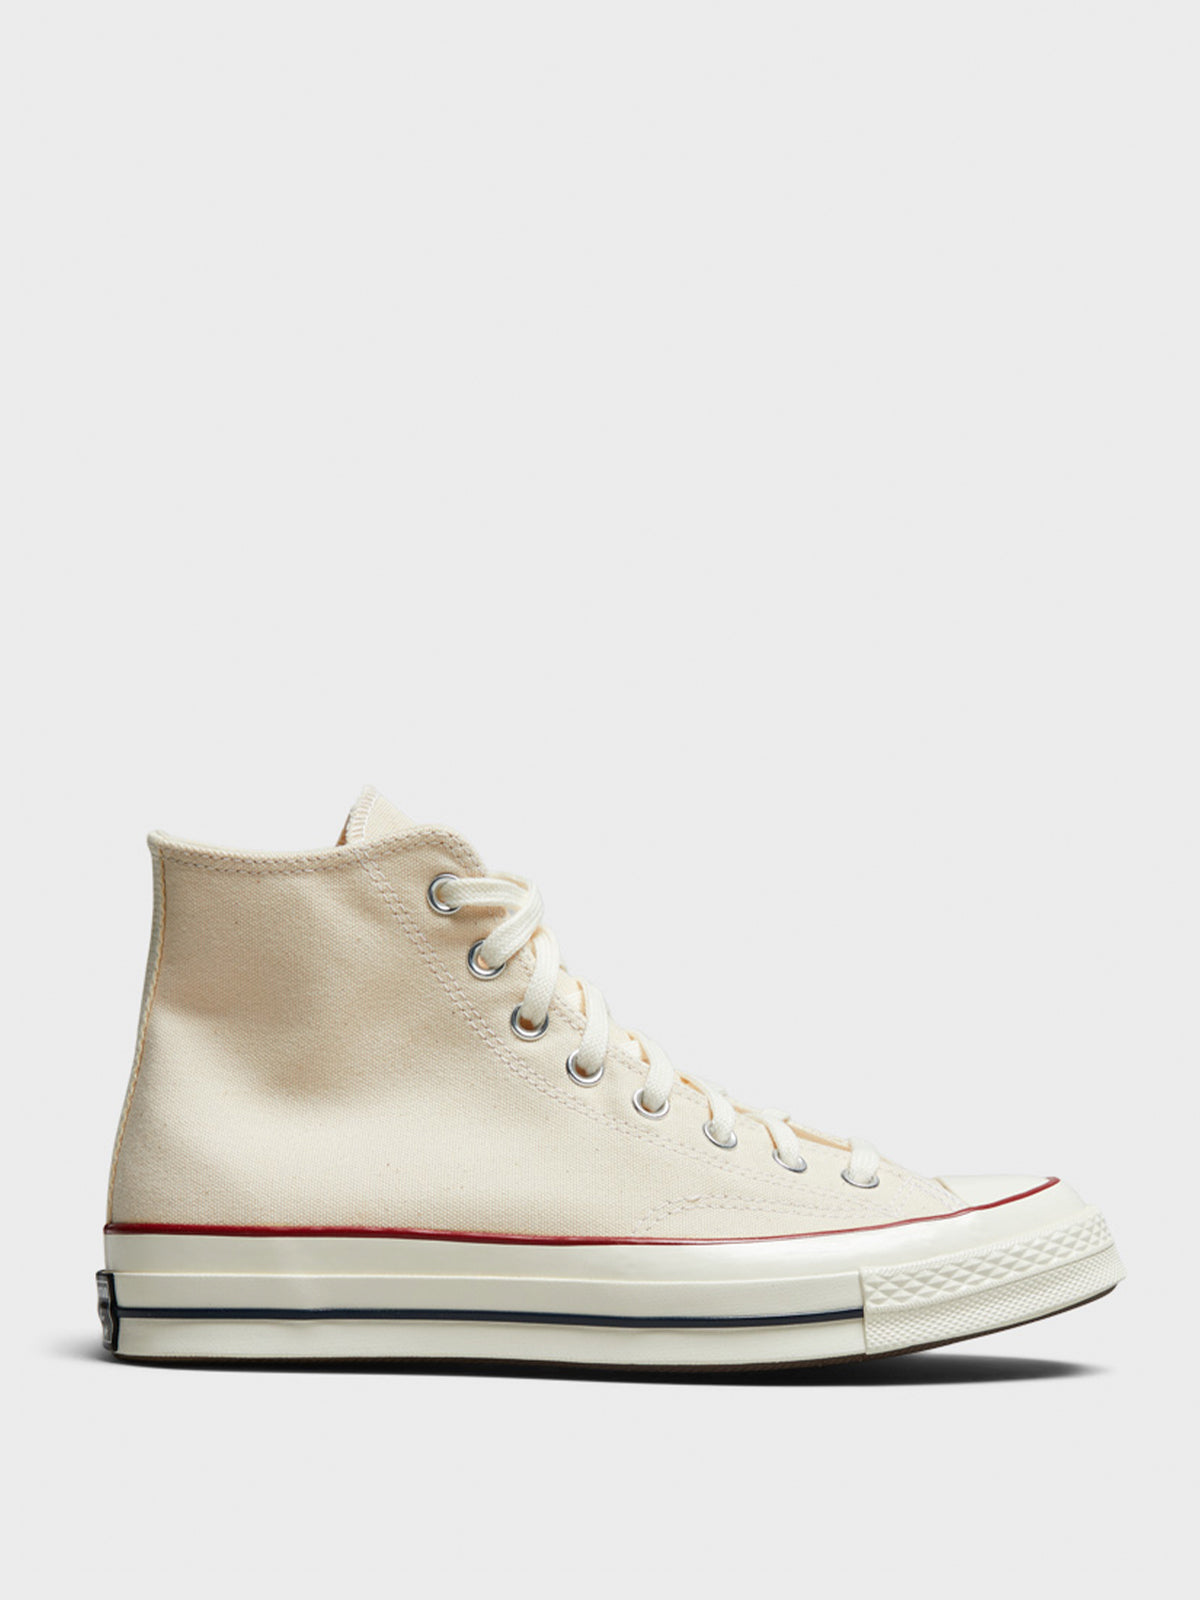 Chuck 70 High Top Canvas Sneakers in Off-White